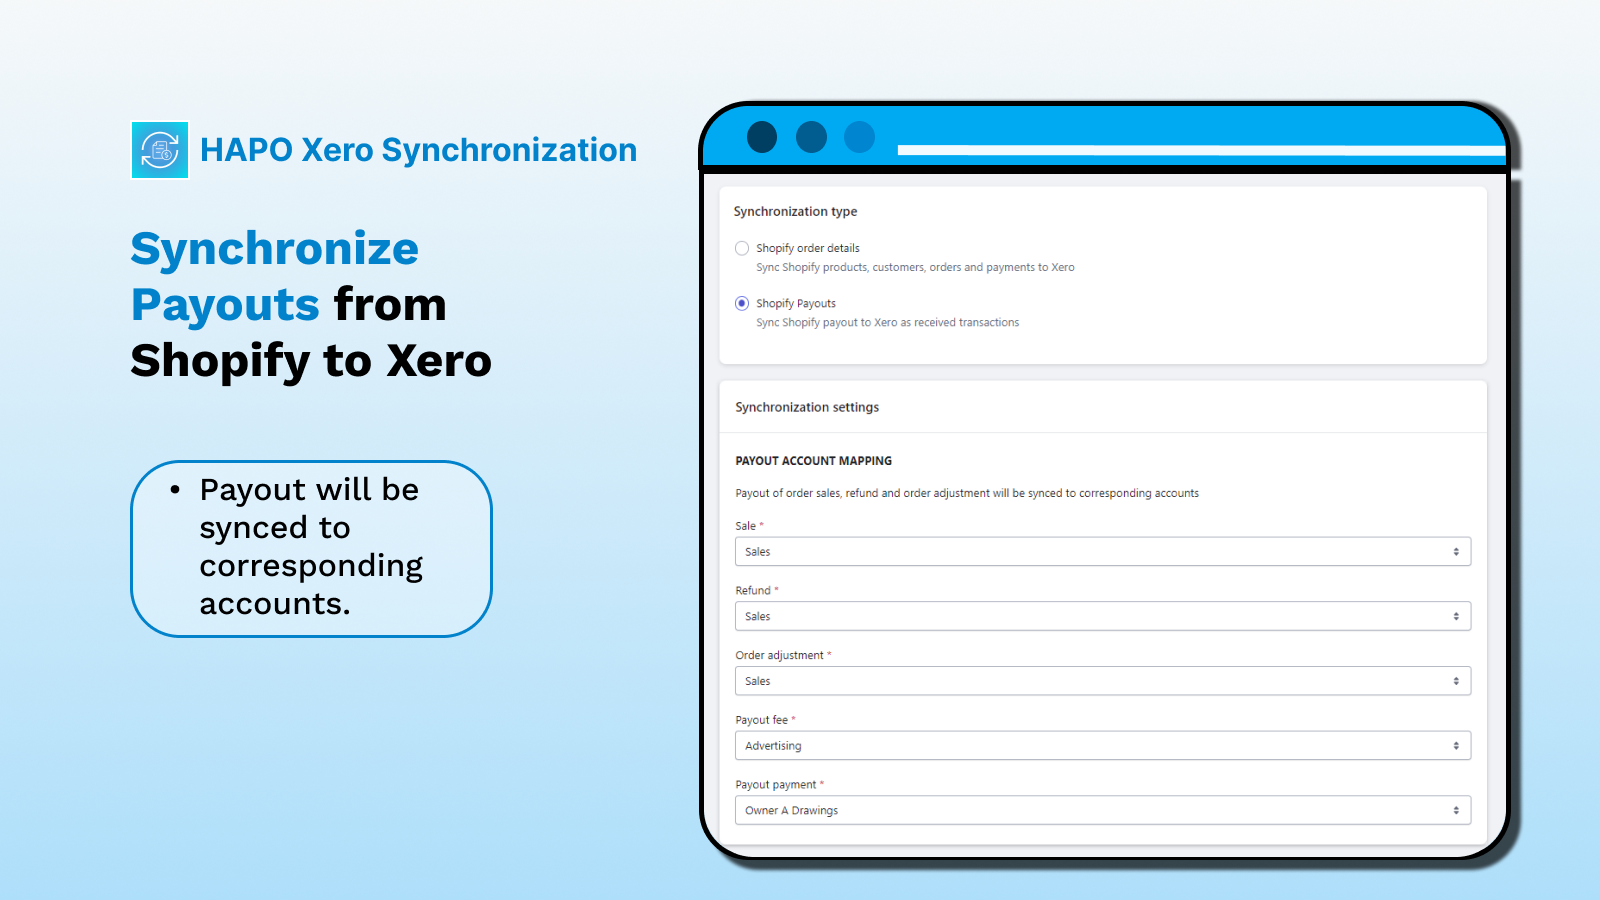 Synchronize Payouts data from Shopify online store to Xero.